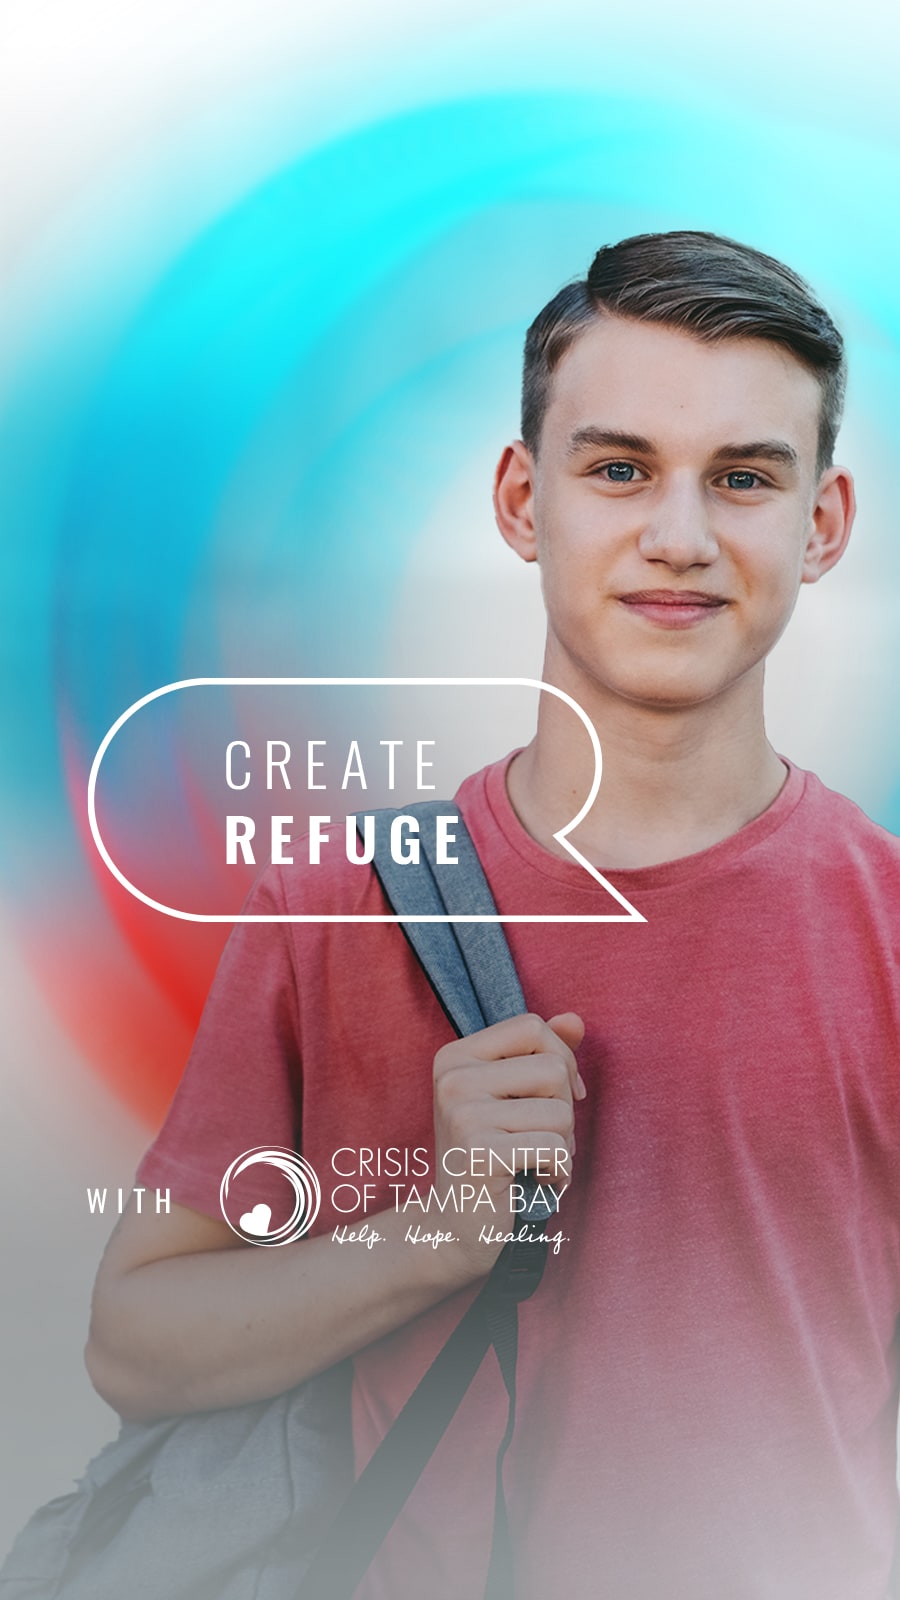 Create Refuge with the Crisis Center of Tampa Bay